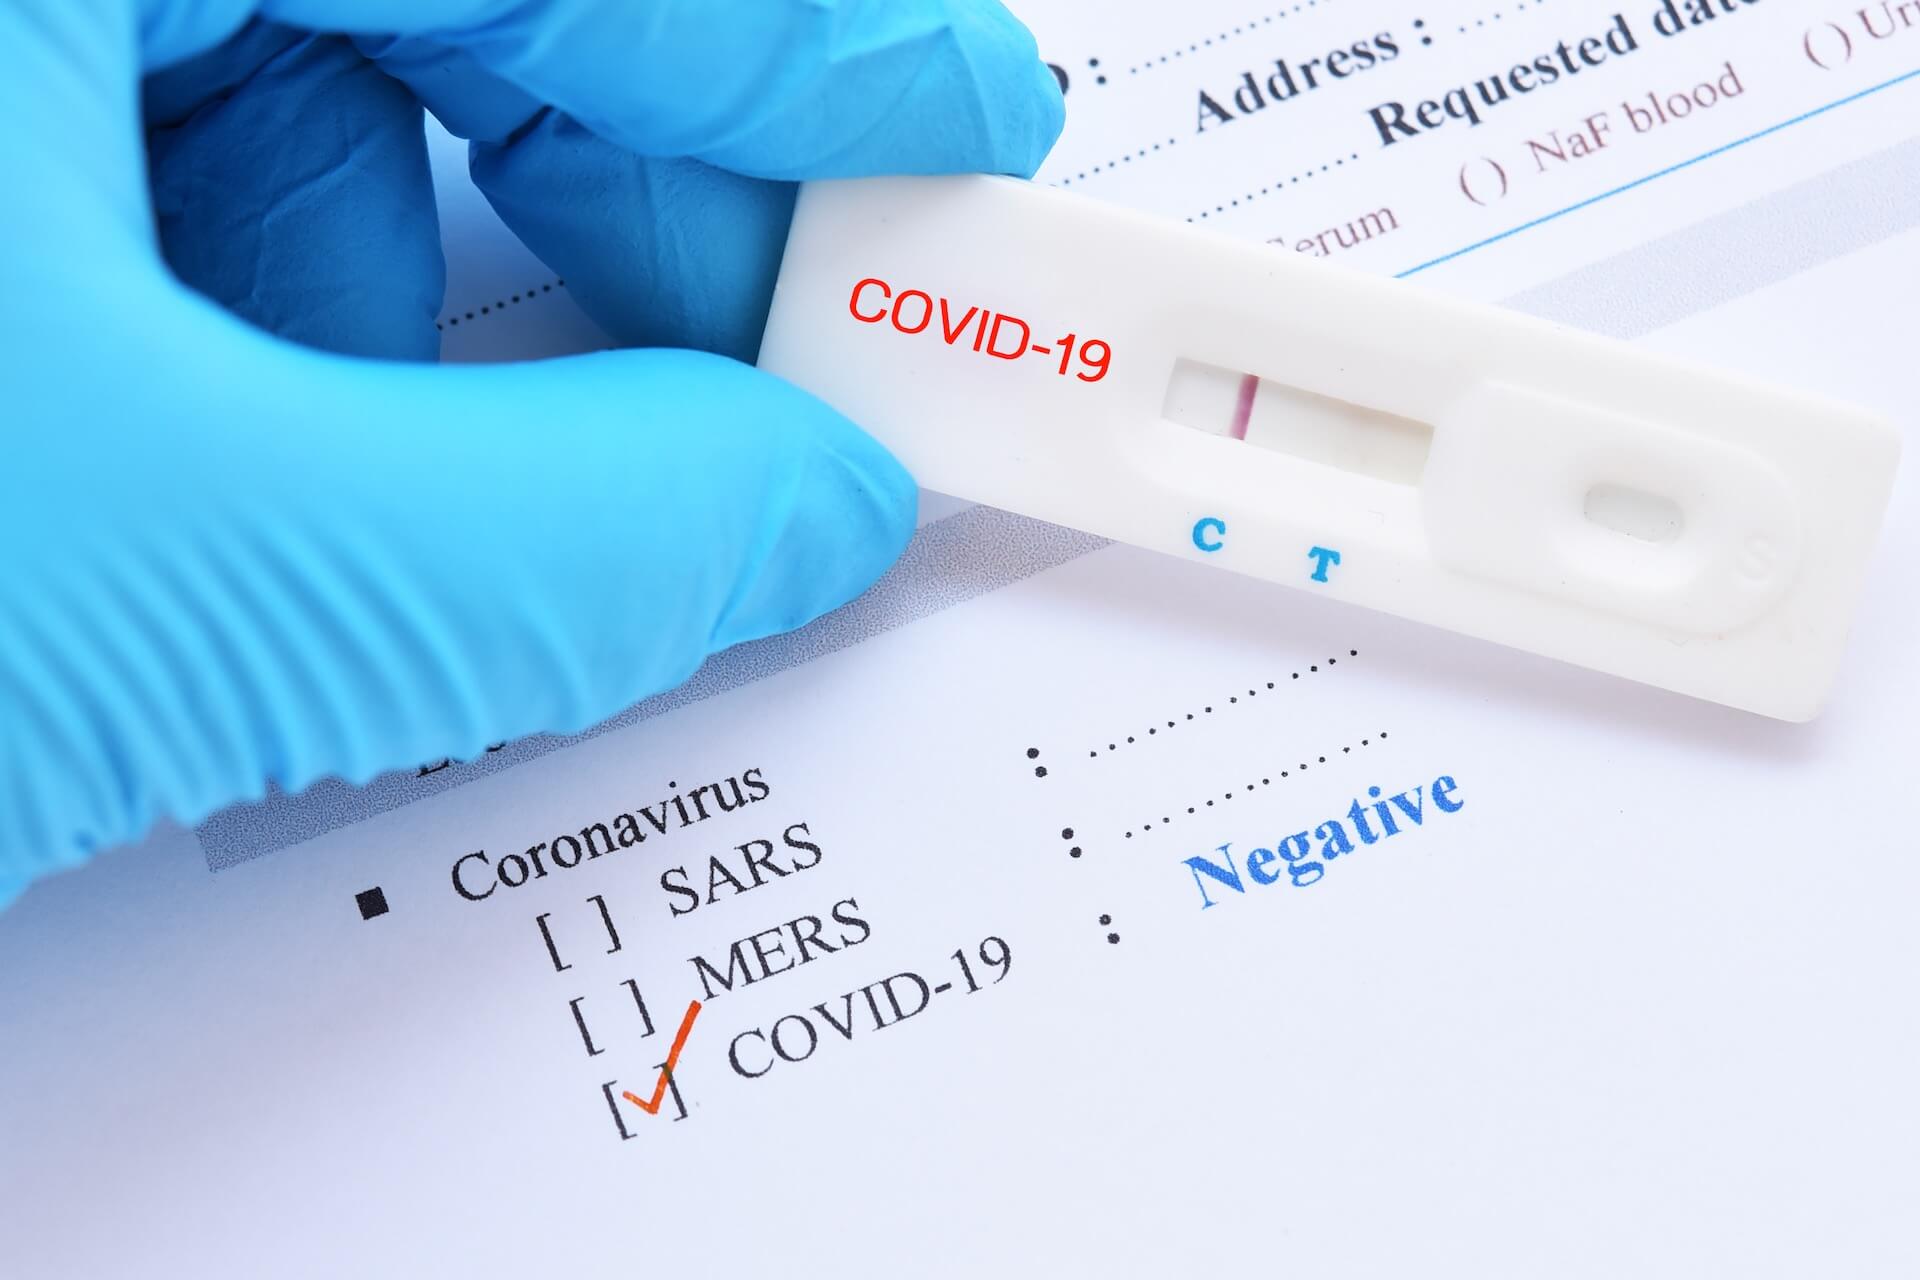 PCR test for COVID-19